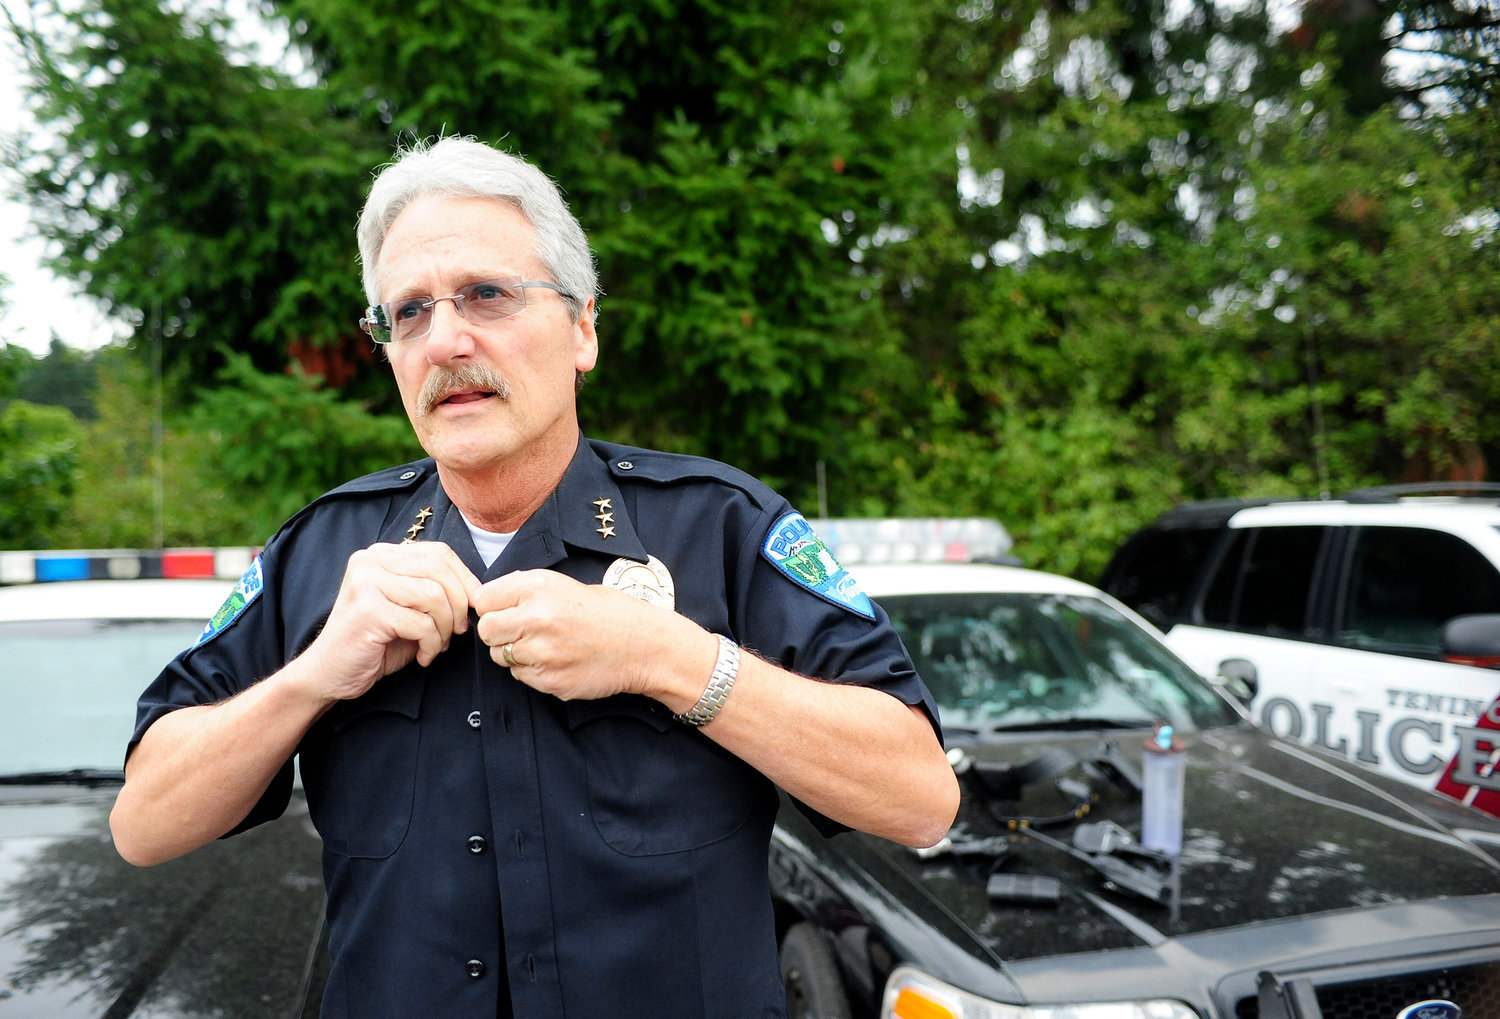 FILE PHOTO — Interim Tenino Police Chief John Hutchings buttons up his shirt after putting on a bulletproof vest prior to heading out on the road.